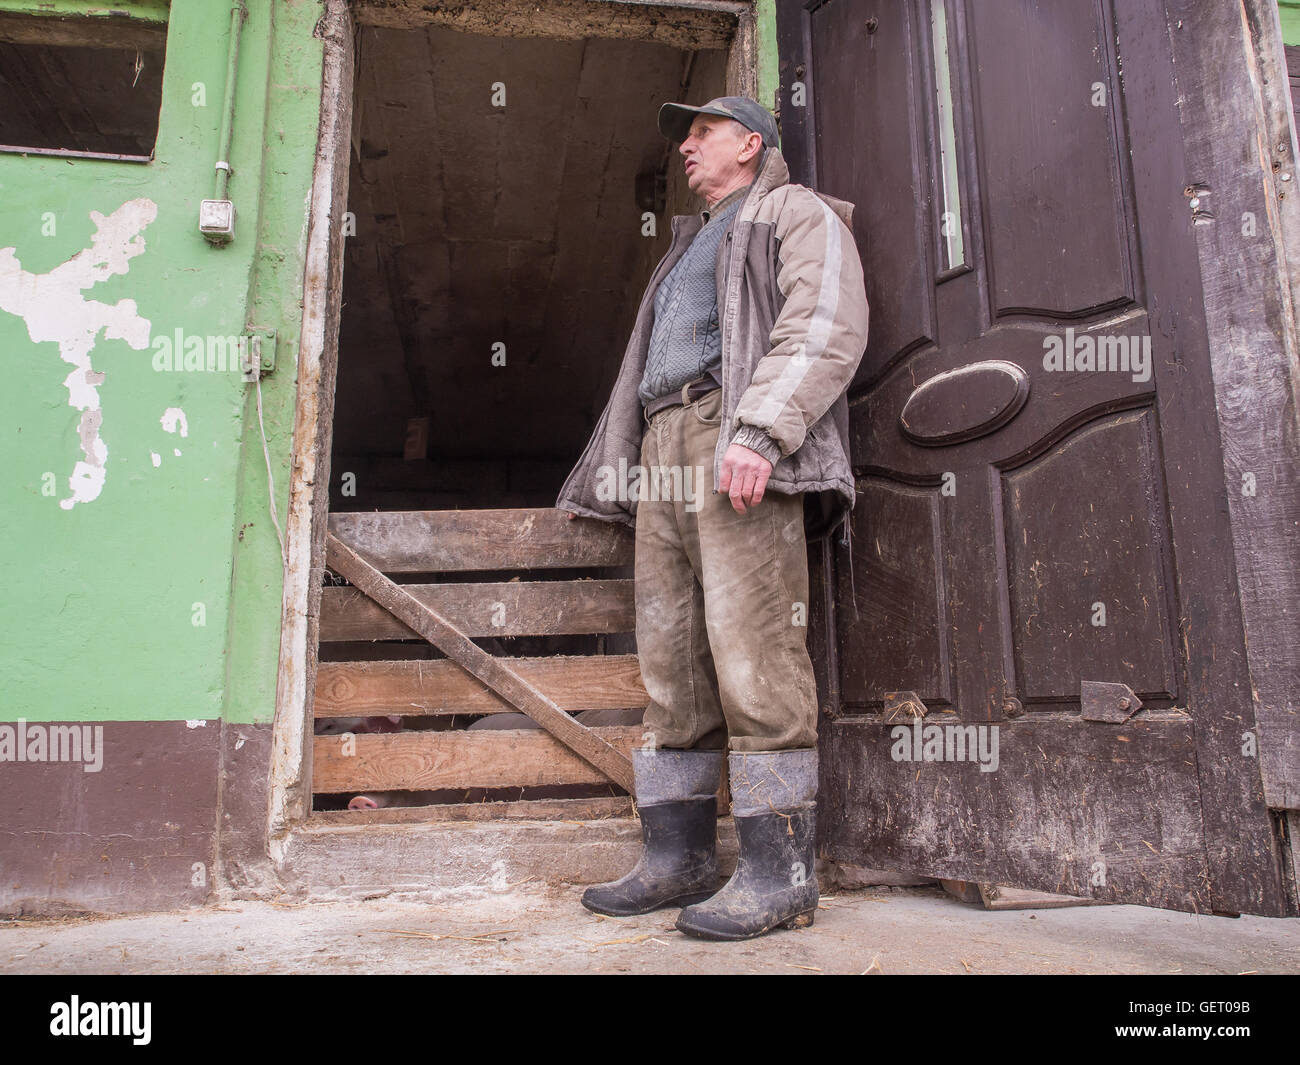 Bobrek , Poland - February 10, 2016: A polish farmer standing in front of a pigstay Stock Photo